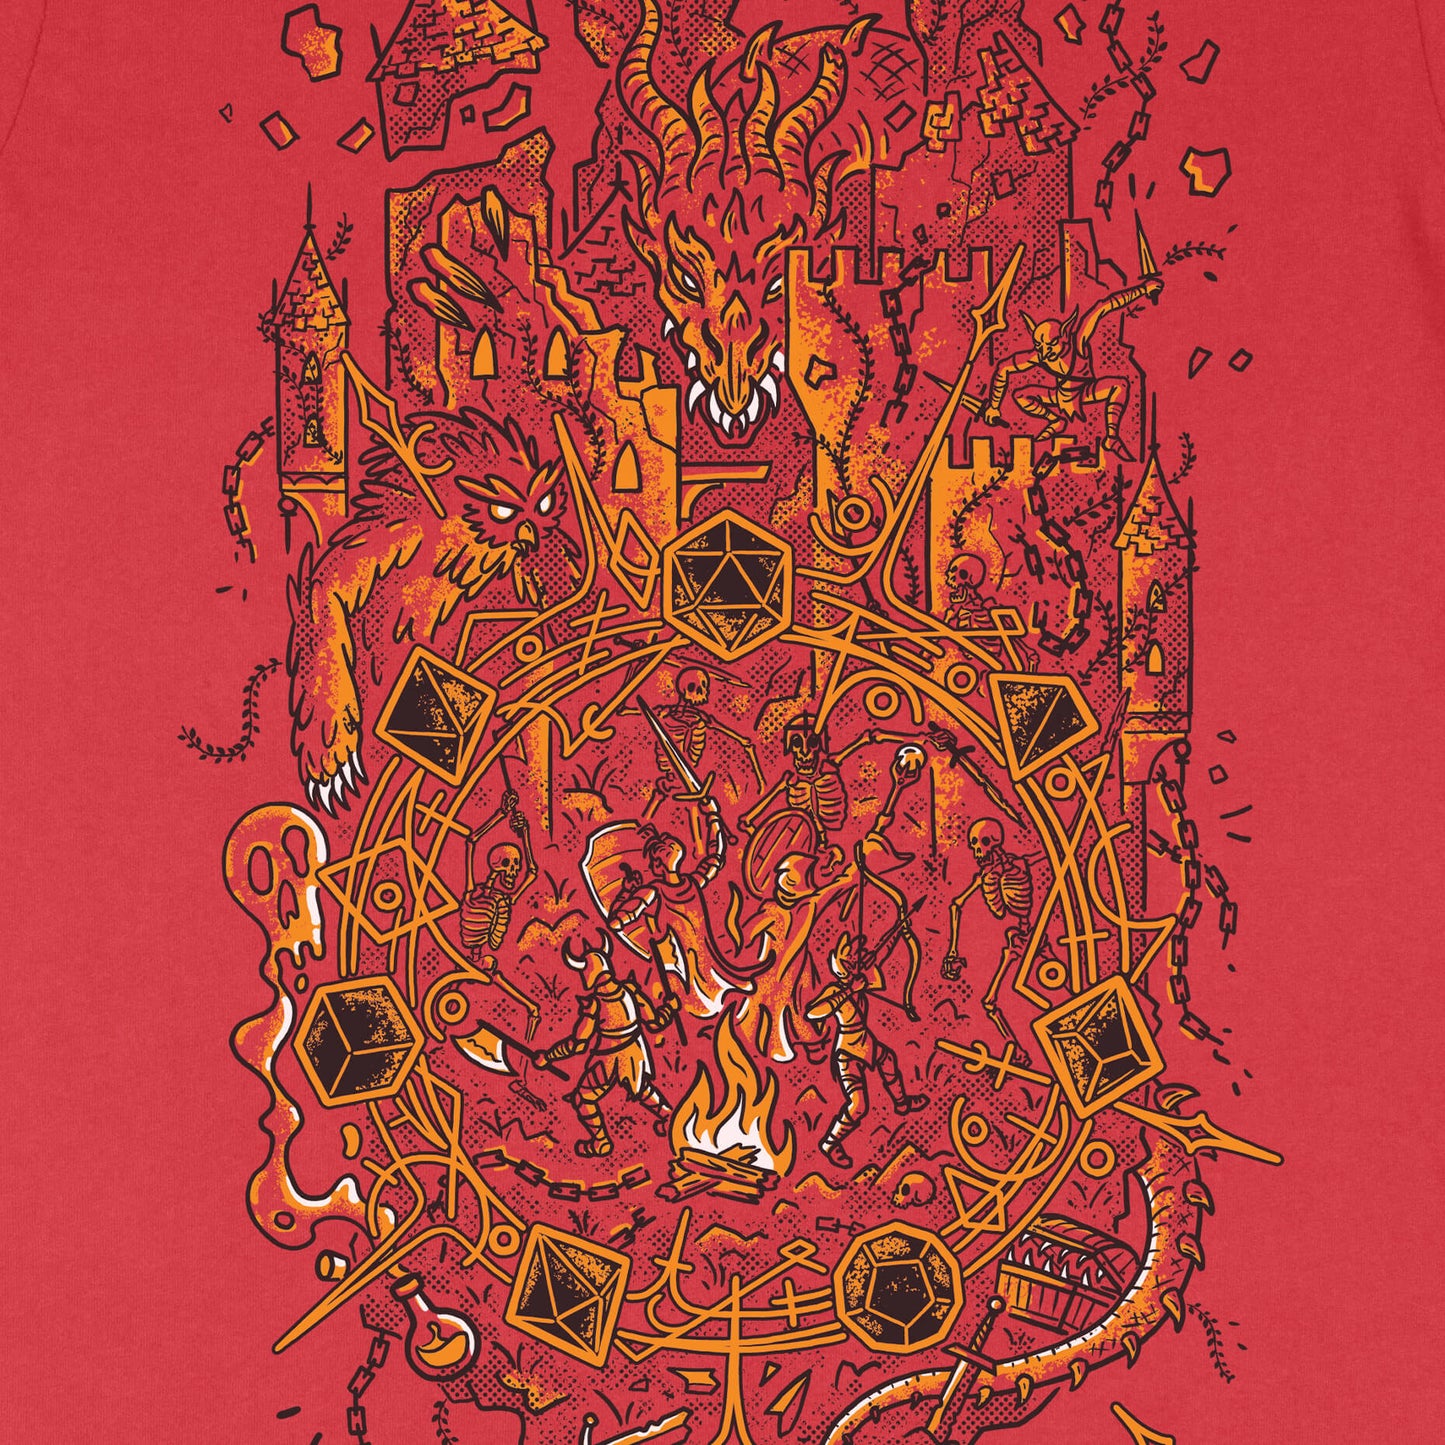 Castle ruins crumbling as the dragon crashes through them towards the party of player characters and their campfire, printed on red fabric. For RPG nights and game nights!